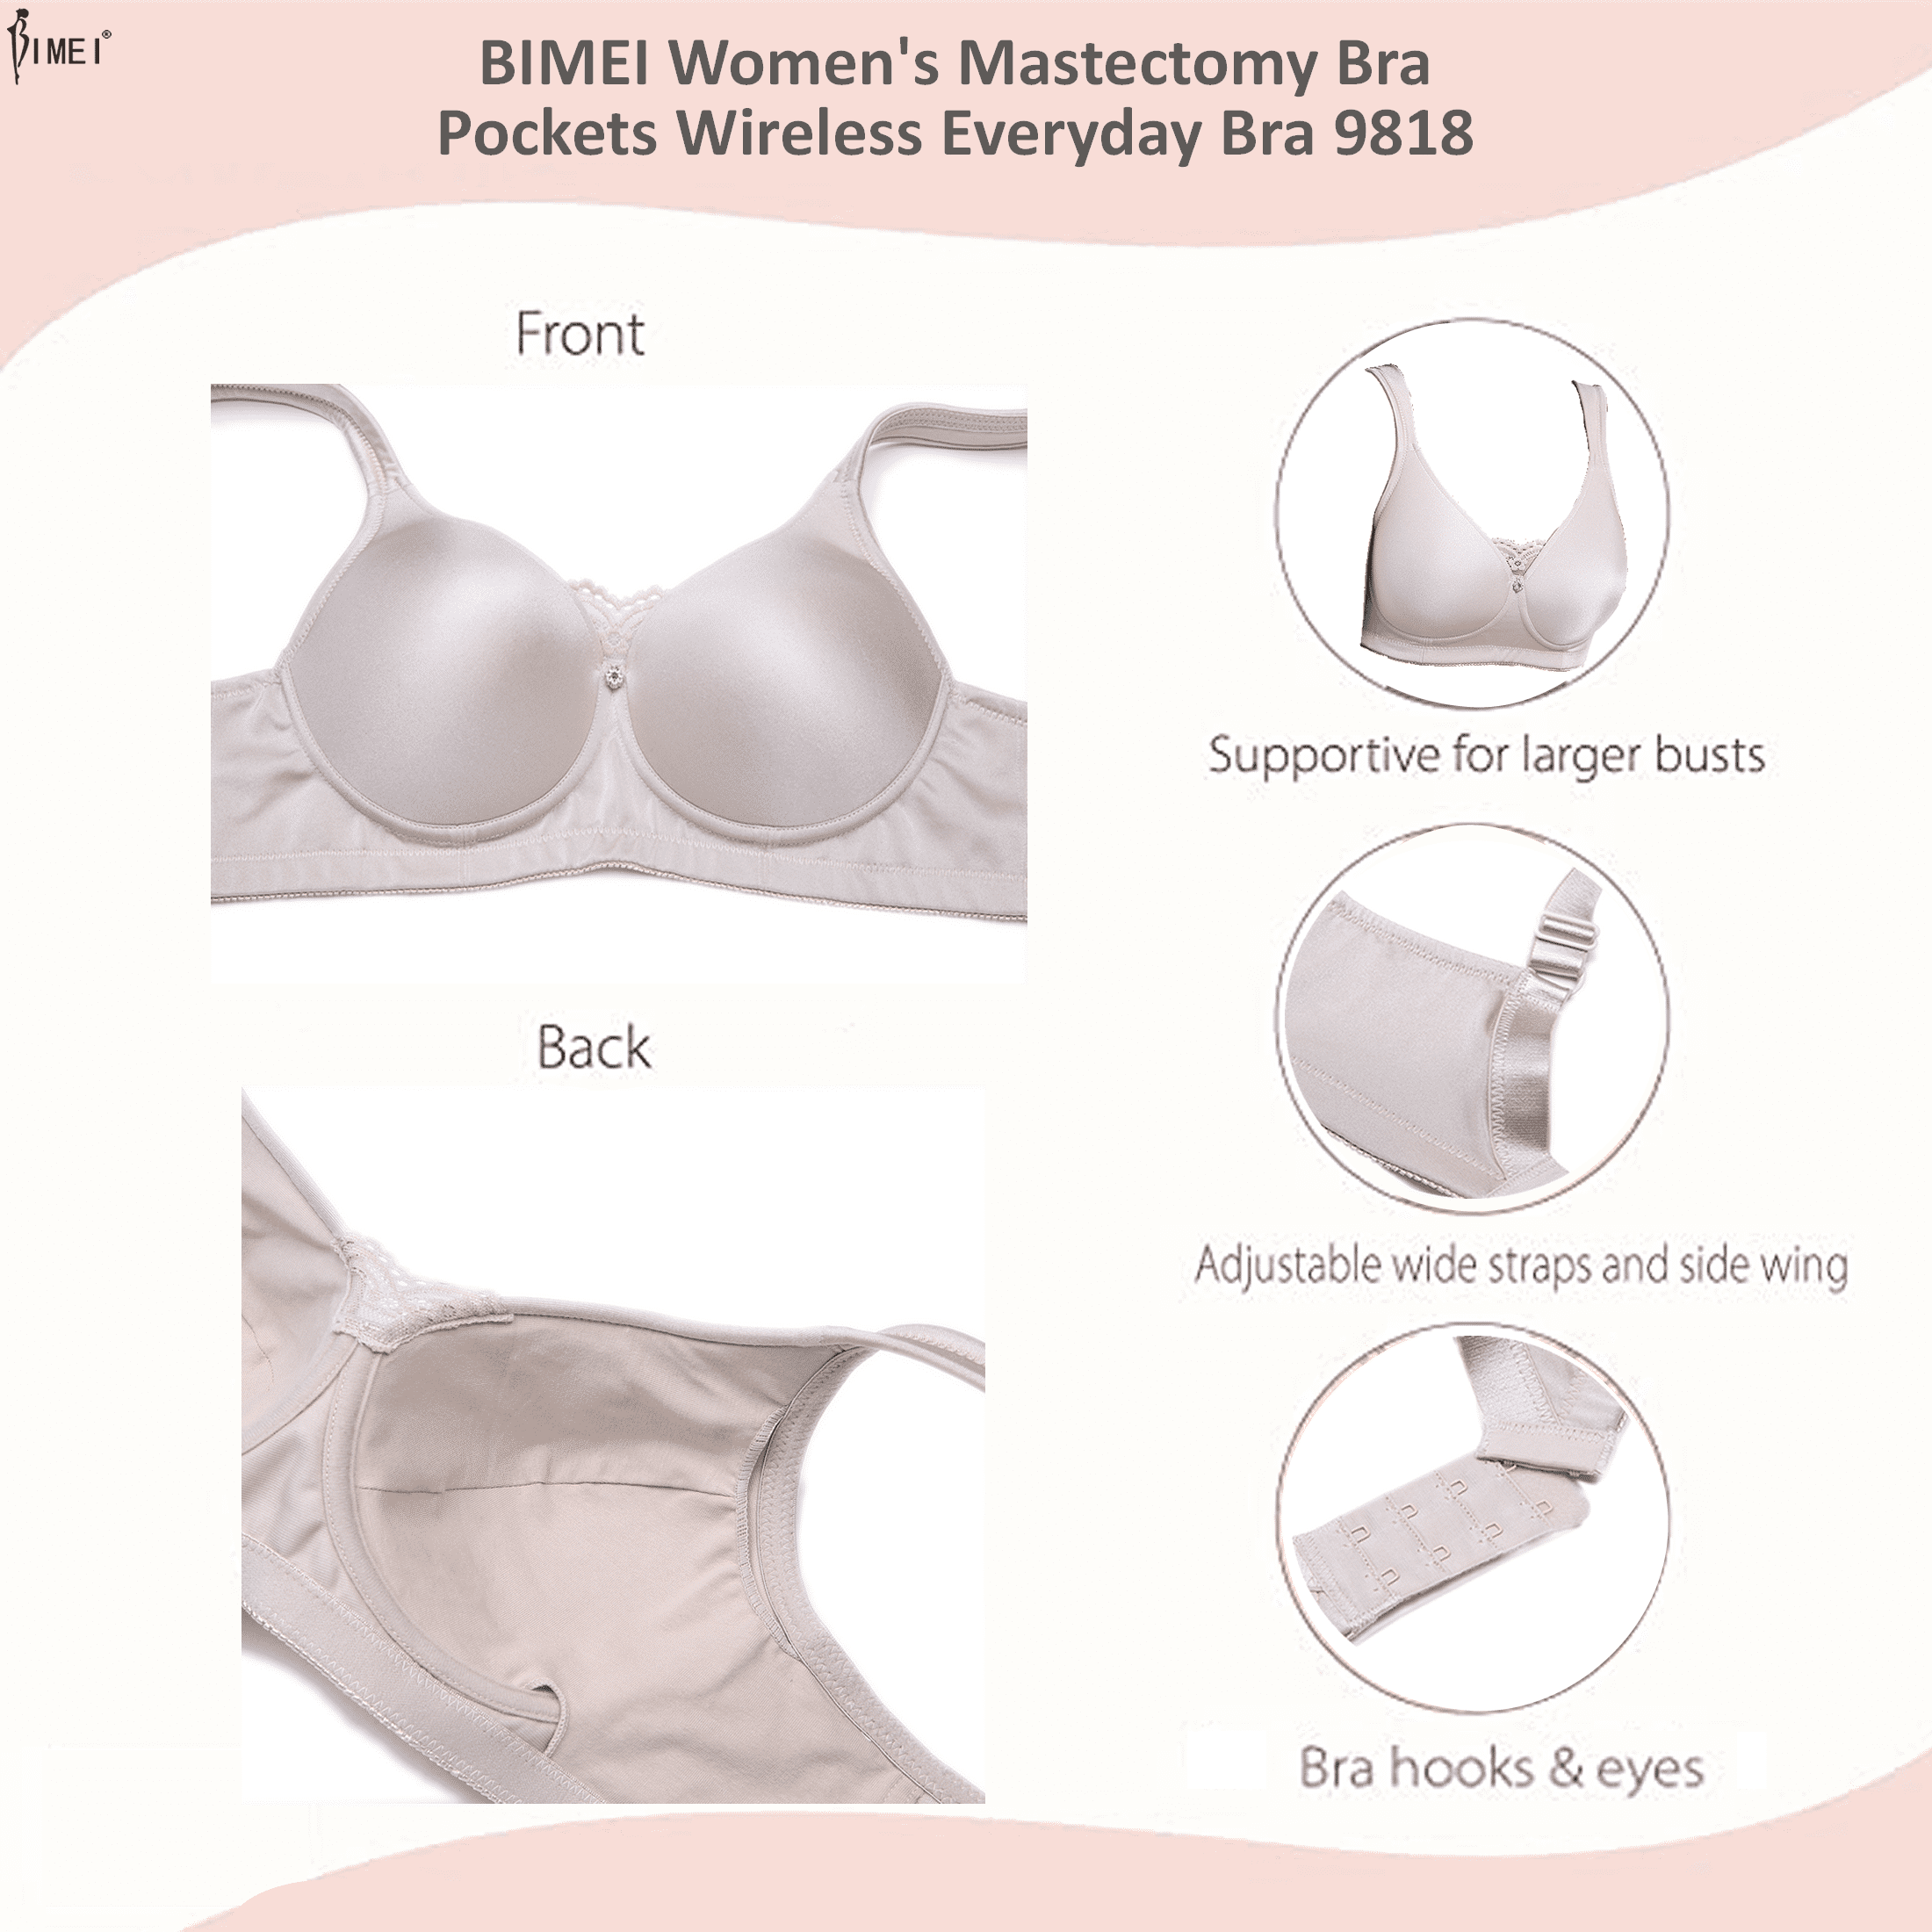 BIMEI Women's Mastectomy Bra Pockets Wireless Post-Surgery Invisible  Pockets for Breast Forms Everyday Bra Plus Size Bra 9818,Beige, 38C 